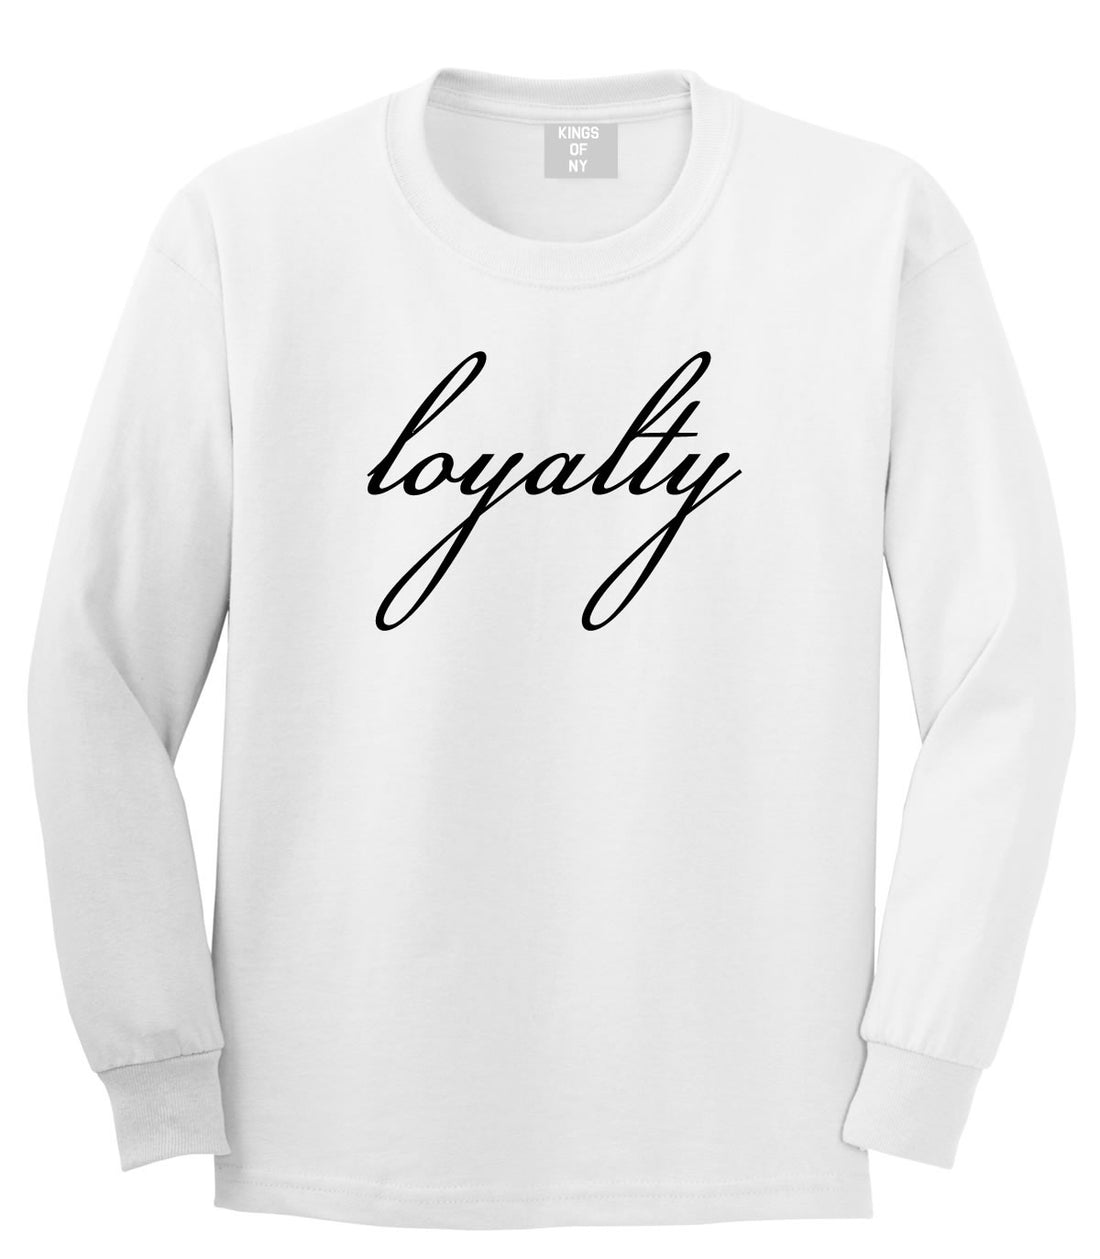 Loyalty Respect Aint New York Hoes Long Sleeve T-Shirt in White by Kings Of NY